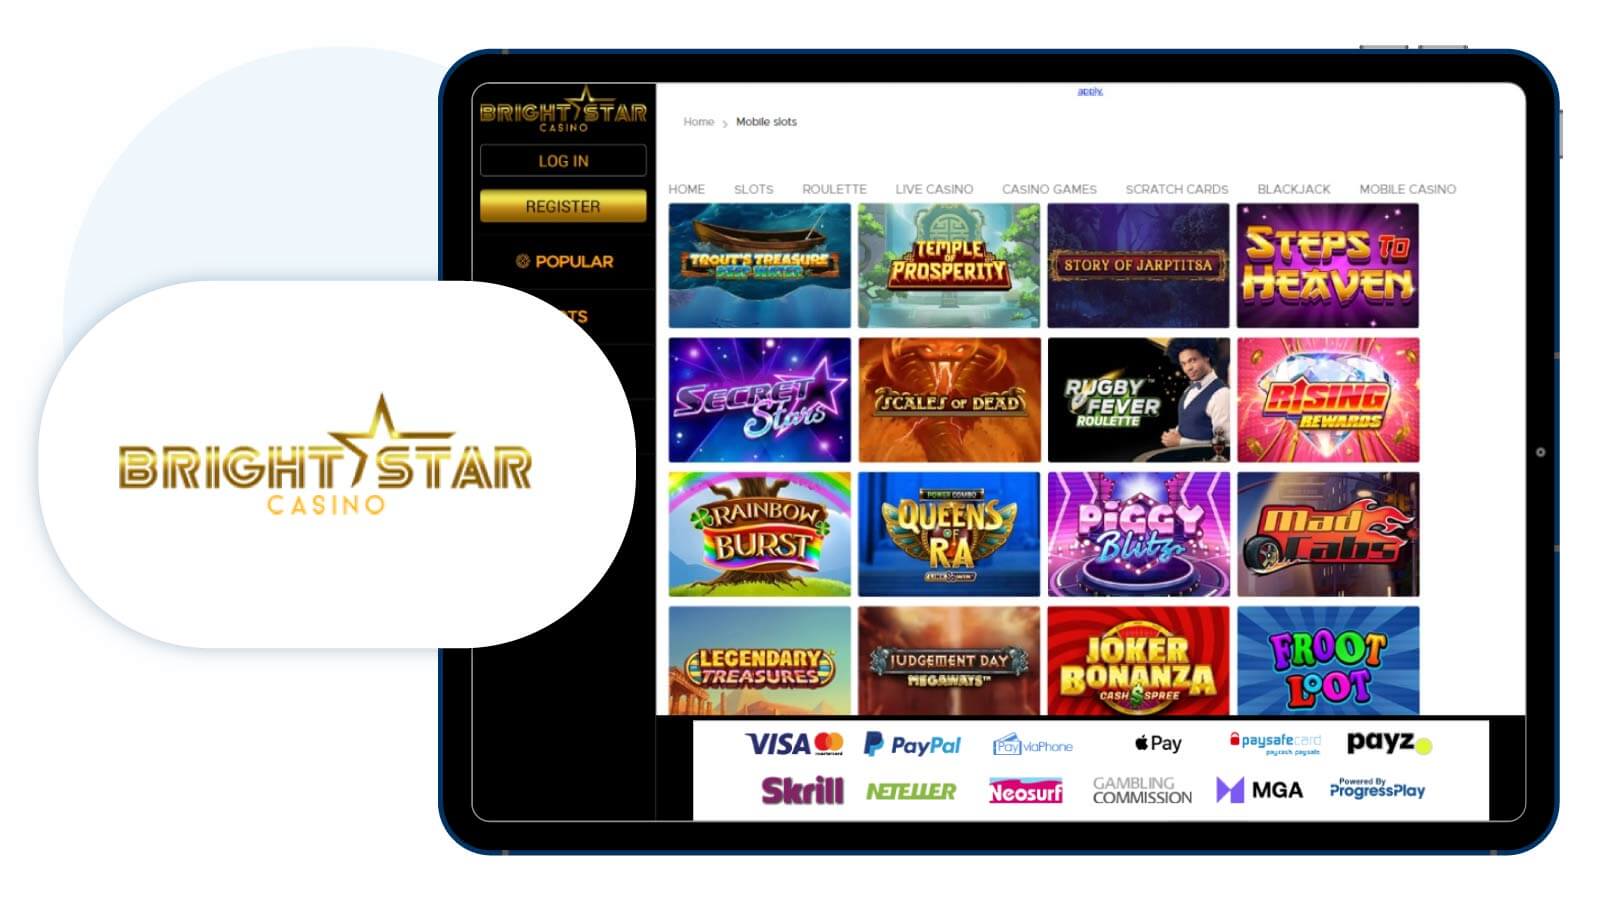 BrightStar-Casino-Explore-+80-Jackpots-with-MuchBetter-Payment-System